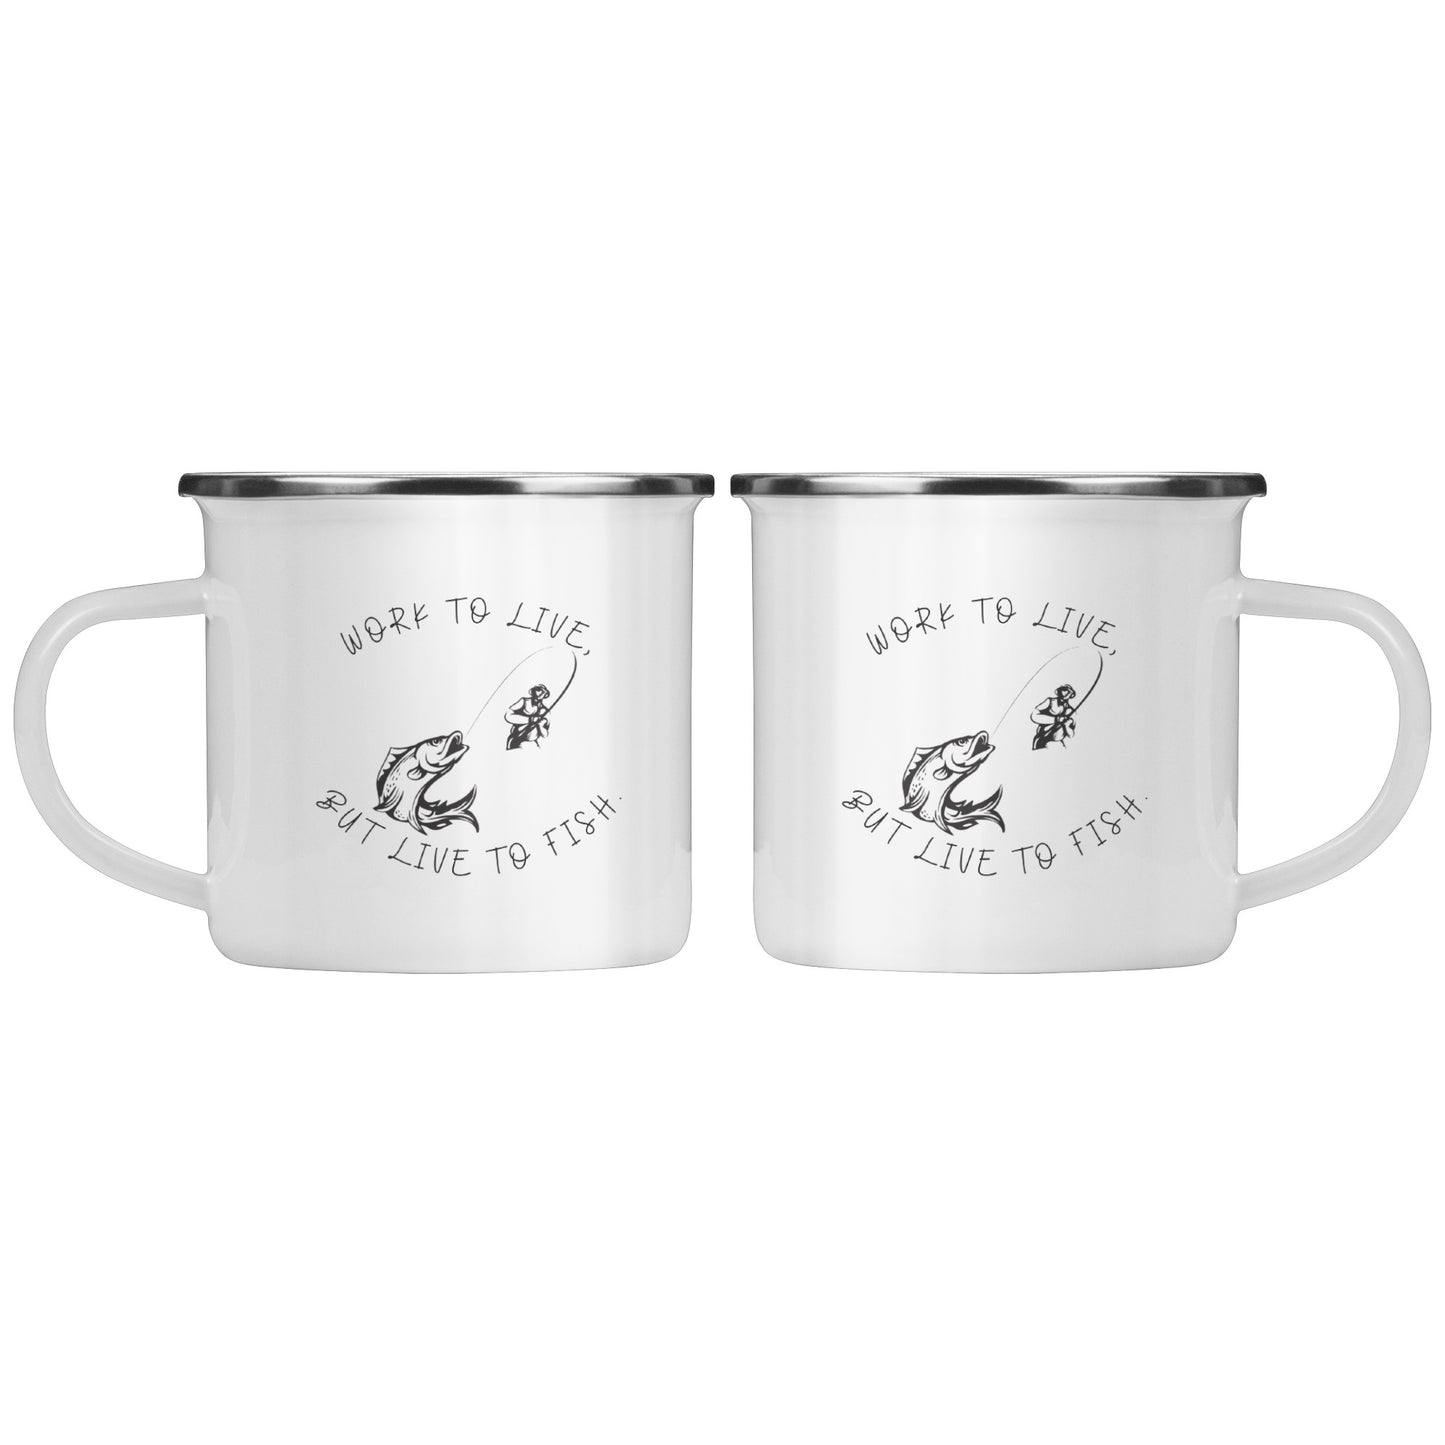 "Live To Fish" Camping Mug For The Outdoor Enthusiast